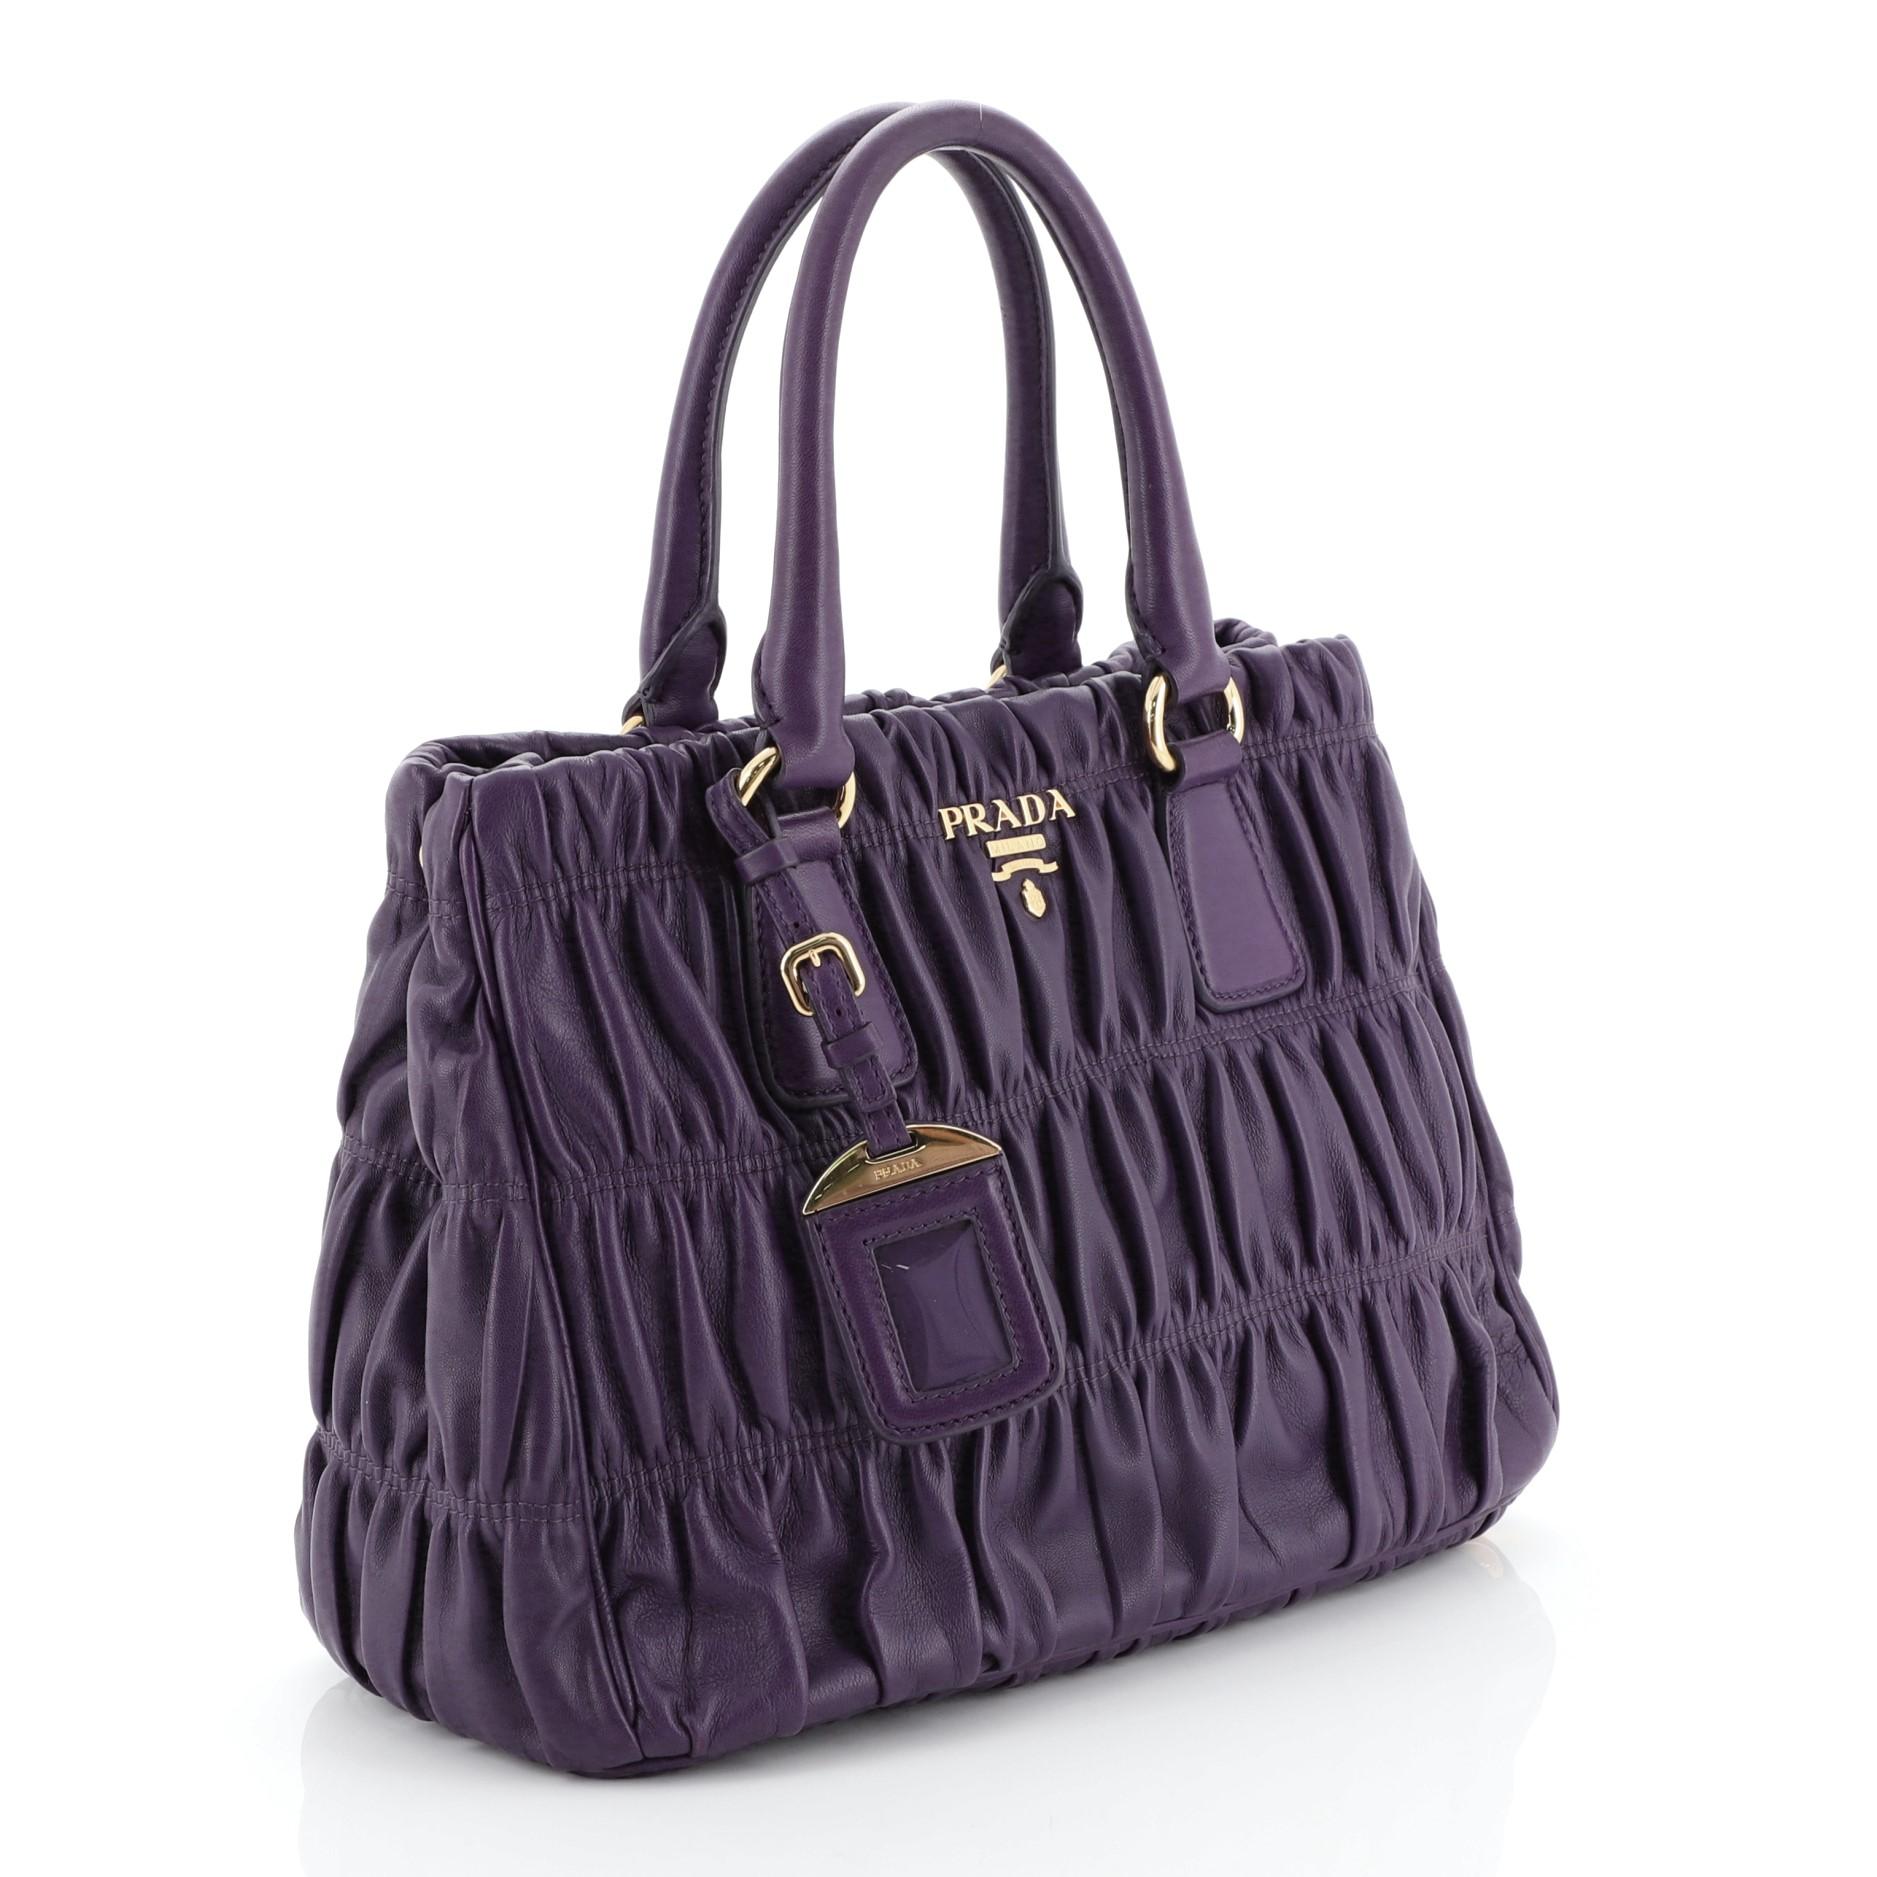 This Prada Gaufre Tote Nappa Leather Small, crafted in purple nappa leather, features dual rolled handles and gold-tone hardware. Its zip closure opens to a purple fabric interior with side zip and slip pockets.

Condition: Great. Creasing near